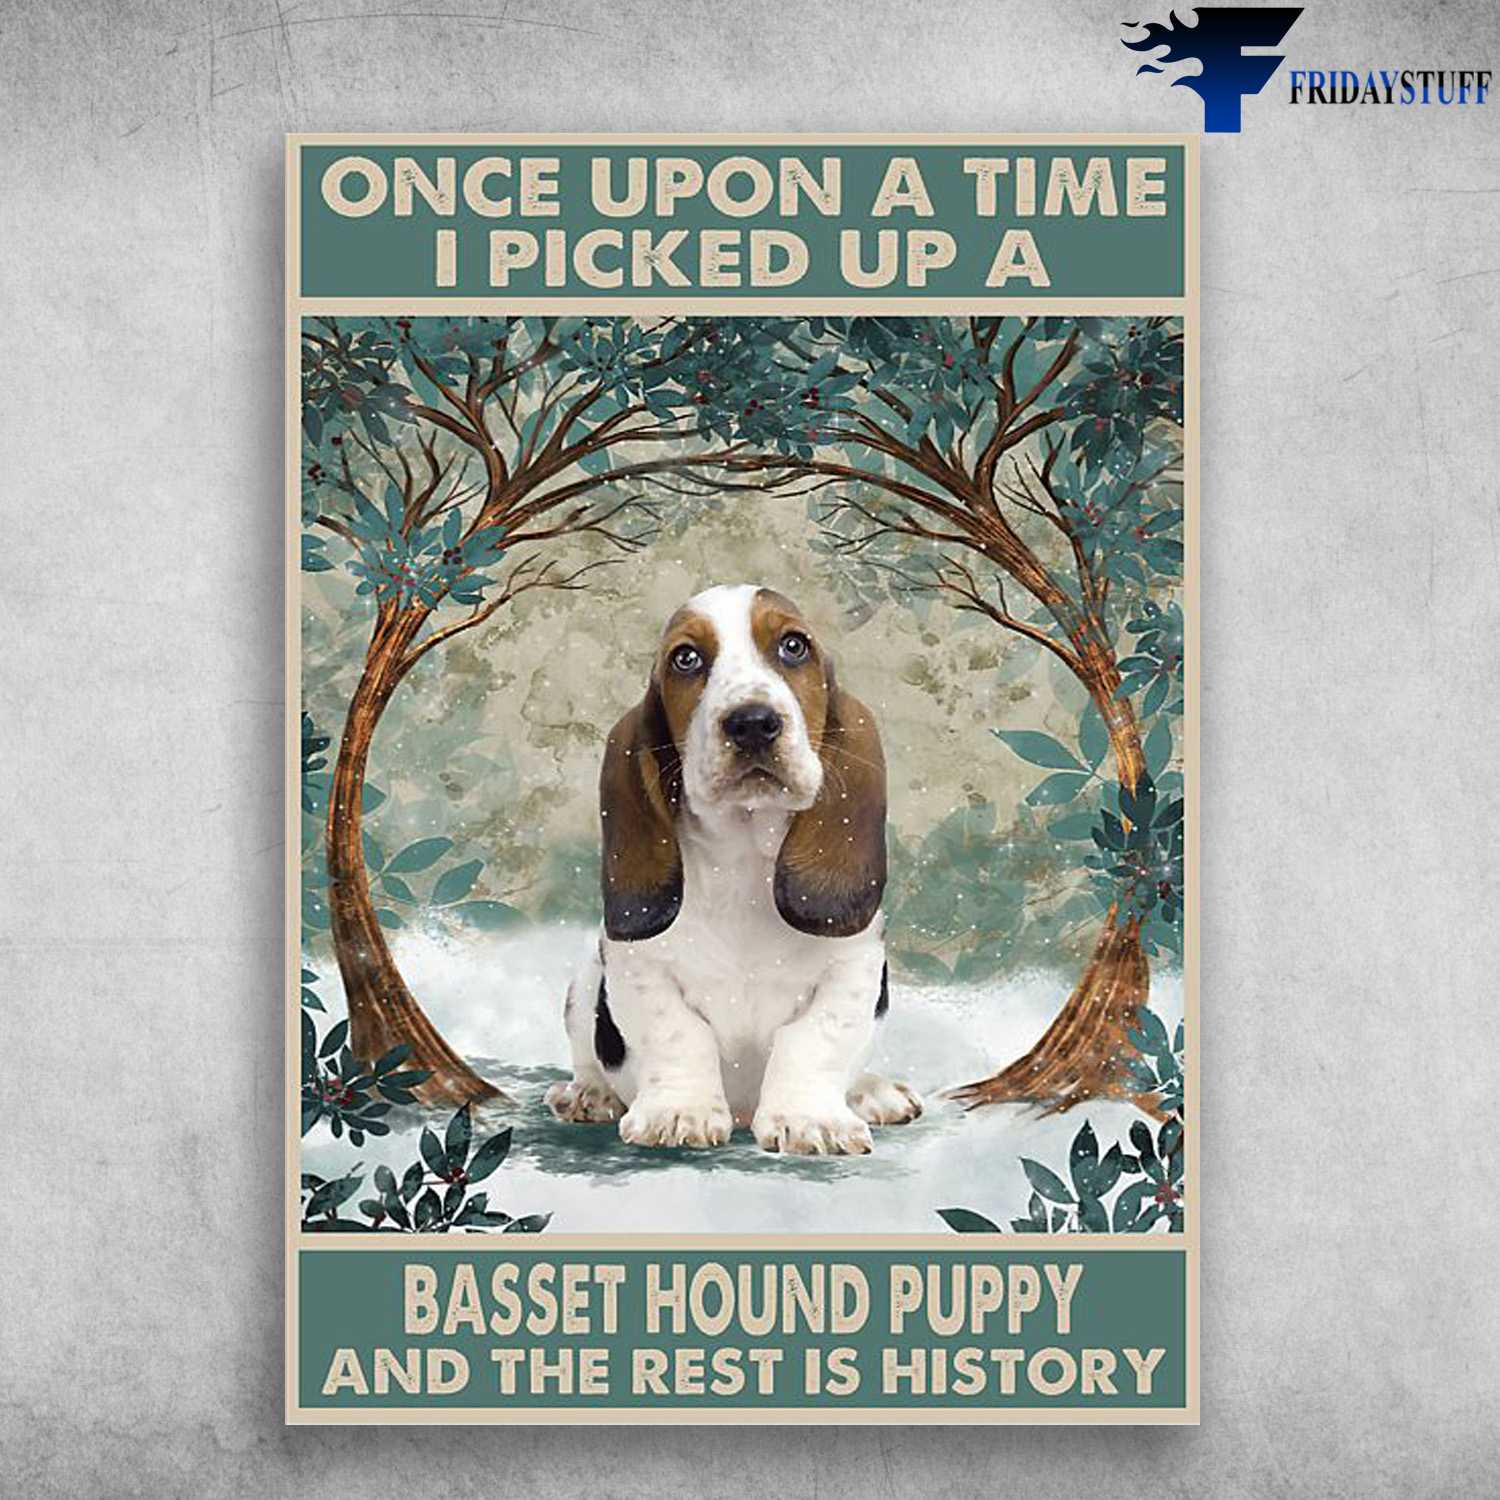 Basset Hound Dog - One Upon A Time, There Was A Basset Hound Puppy, And The Rest Is History